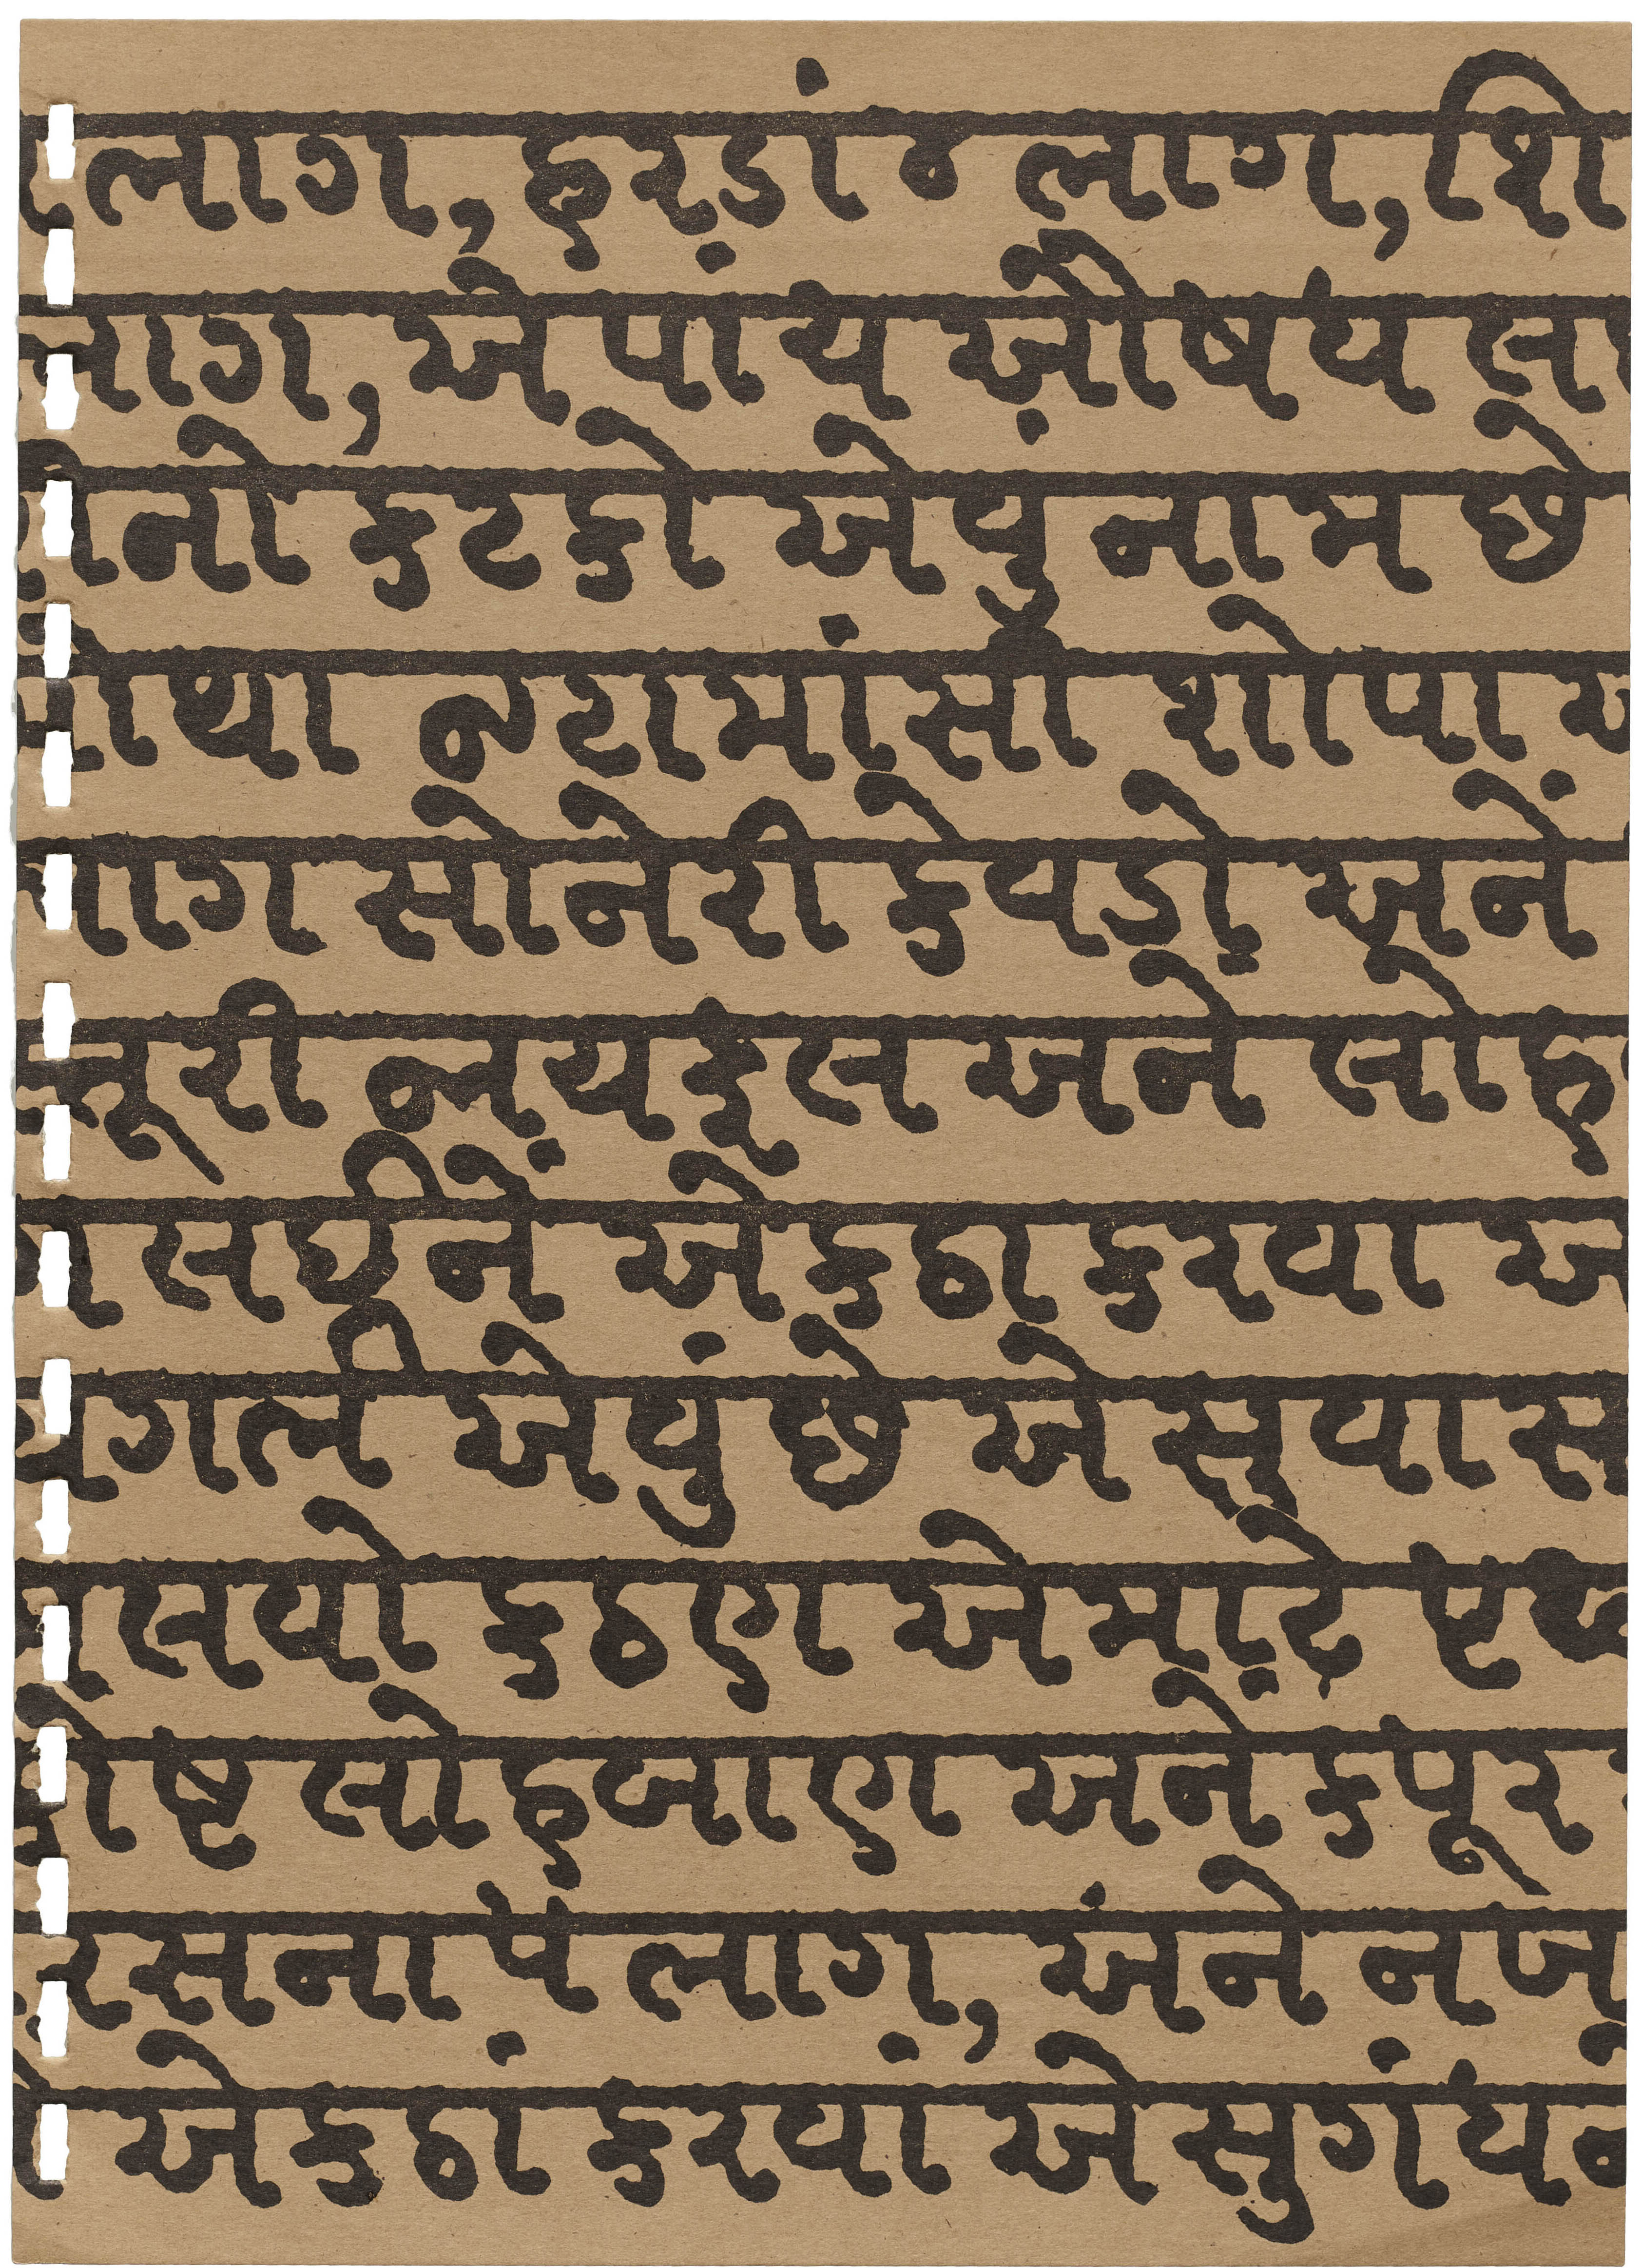 Paragraph relating to the preparation of perfumed toilet accessories, from a lithographed Gujarati book, Bombay, 1850. Note the top line on which the letters hang, unlike the present typographical version of the Gujarati script, which has no top line.